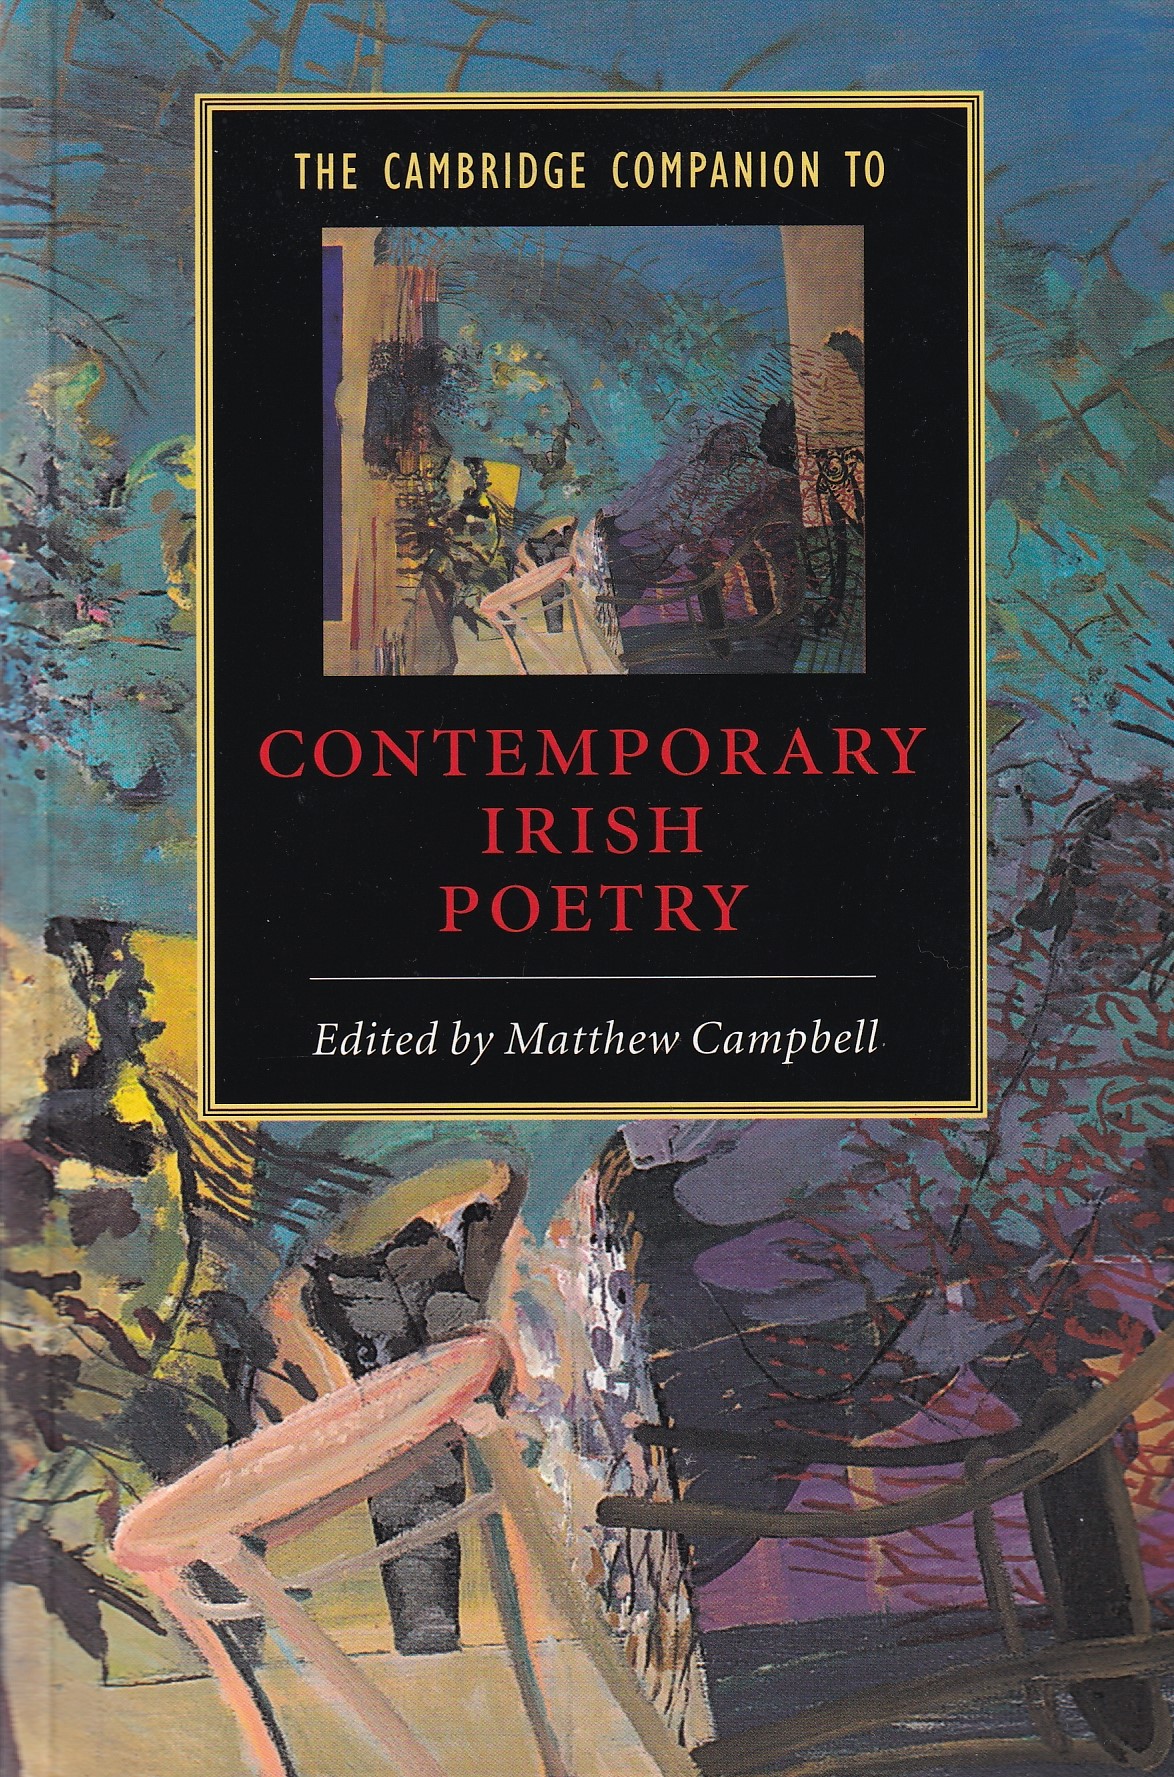 The Cambridge Companion to Contemporary Irish Poetry | Matthew Campbell (ed.) | Charlie Byrne's